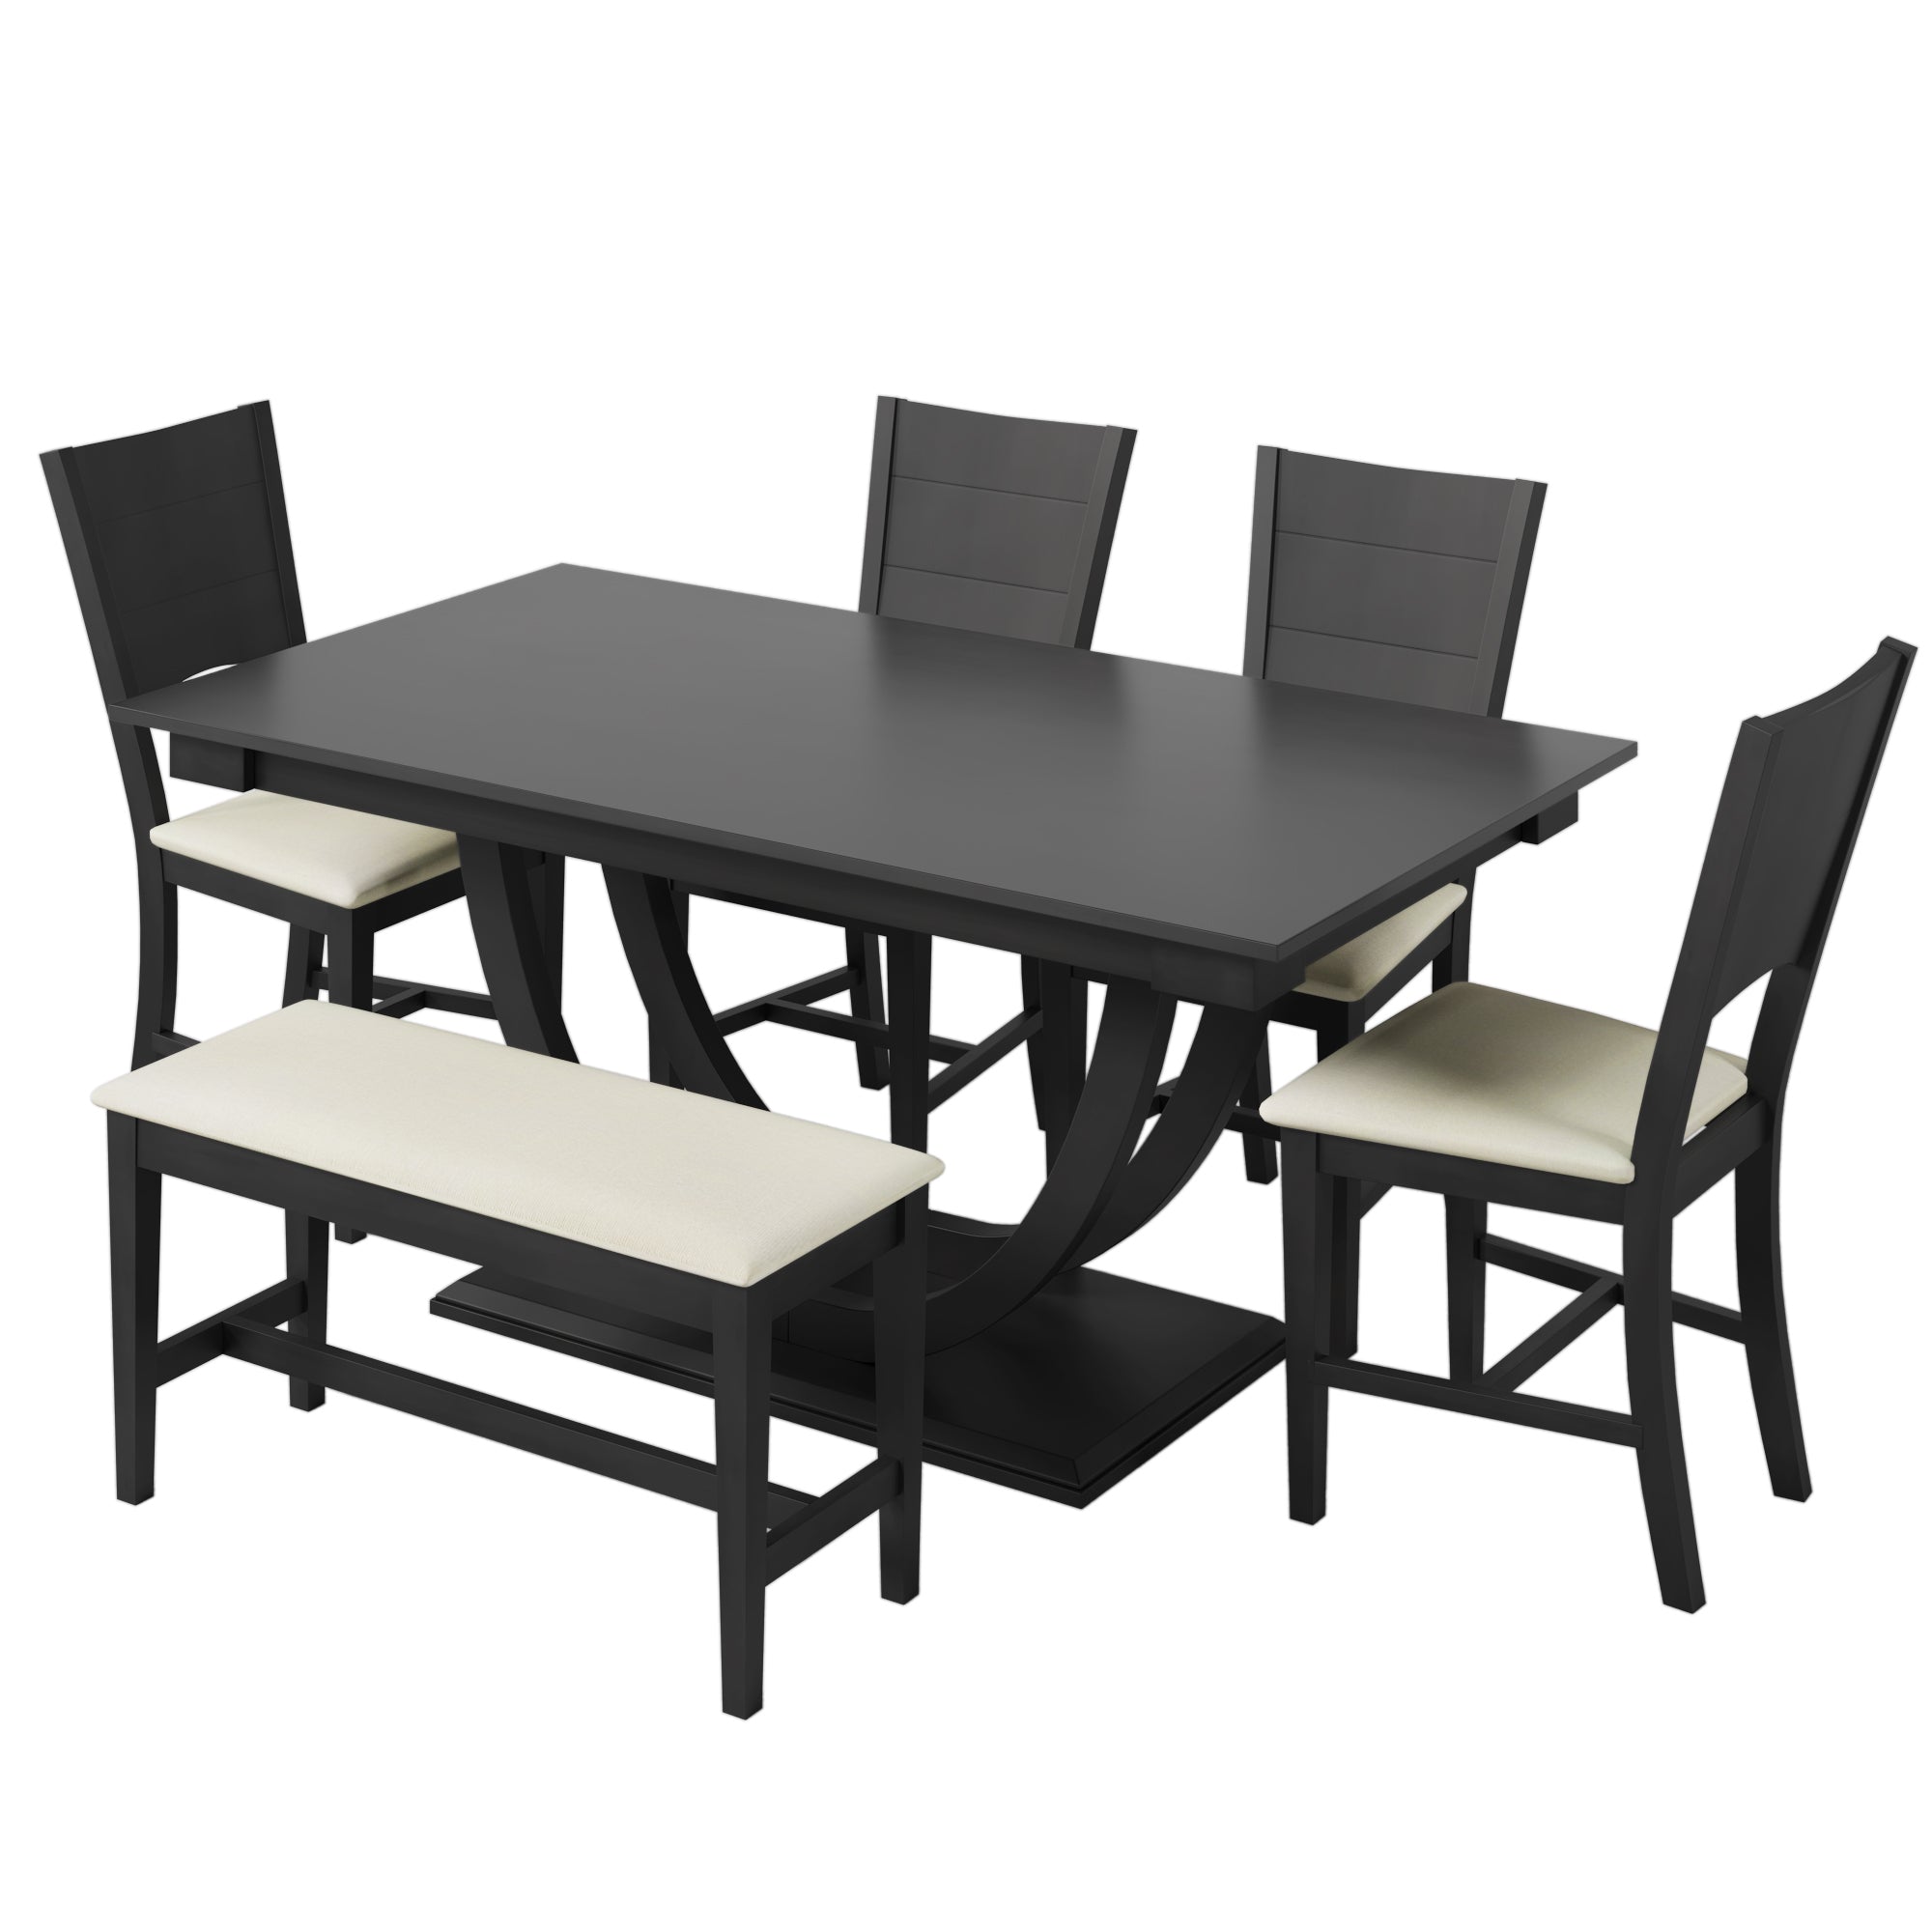 6-Piece Wood Half Round Dining Table Set with Long Bench and 4 Dining Chairs - Grey